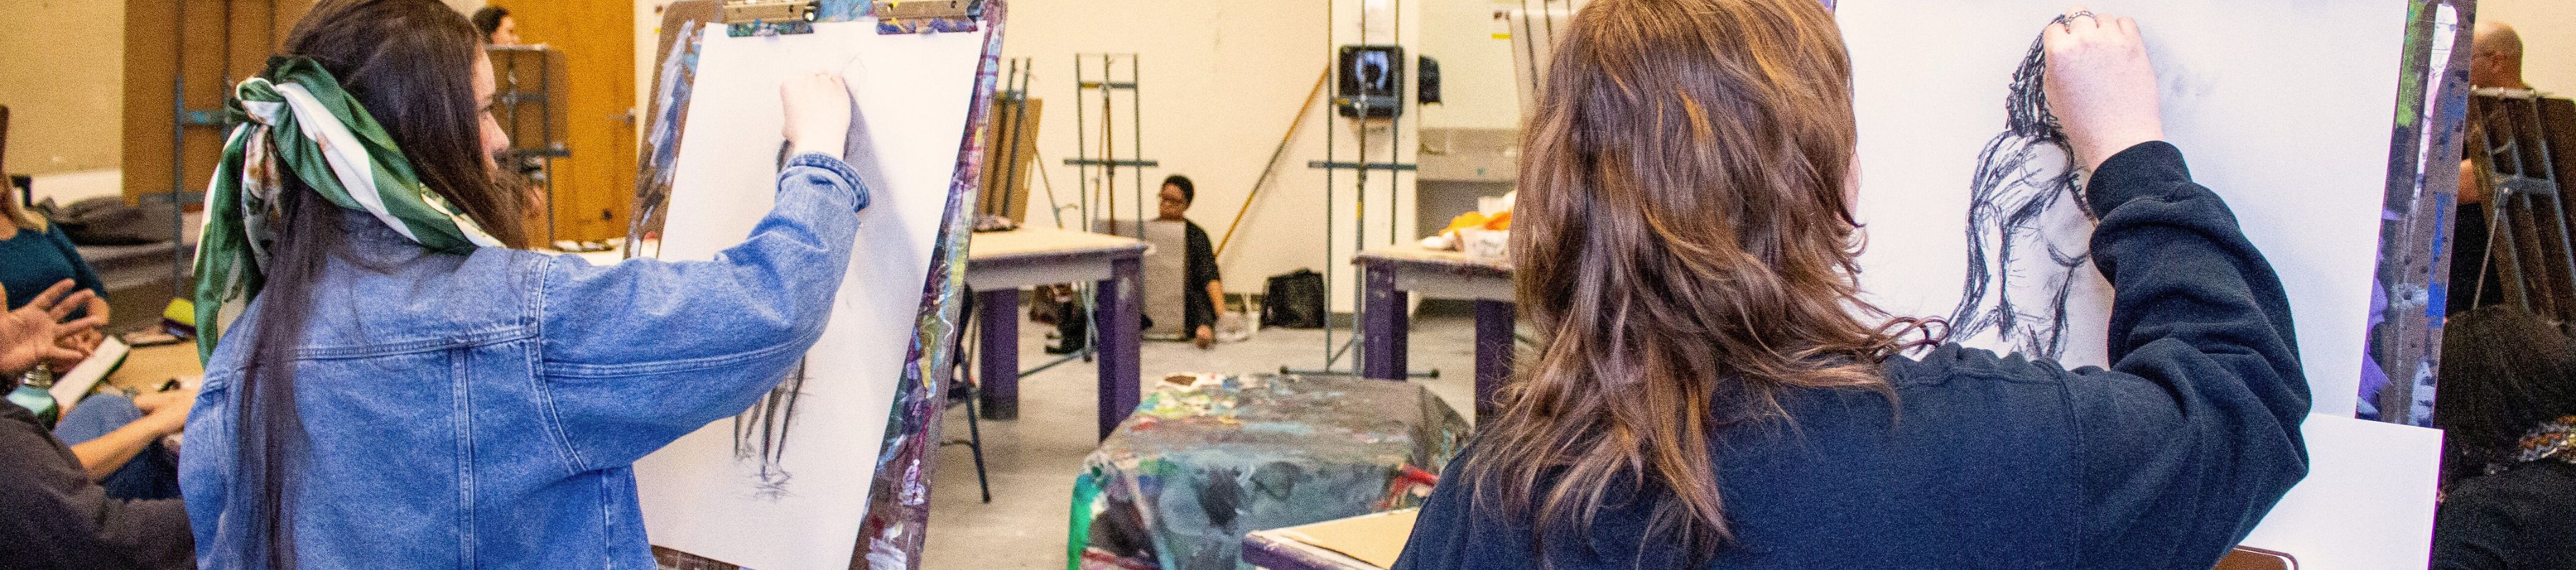 two people in a figure drawing class with large easels 